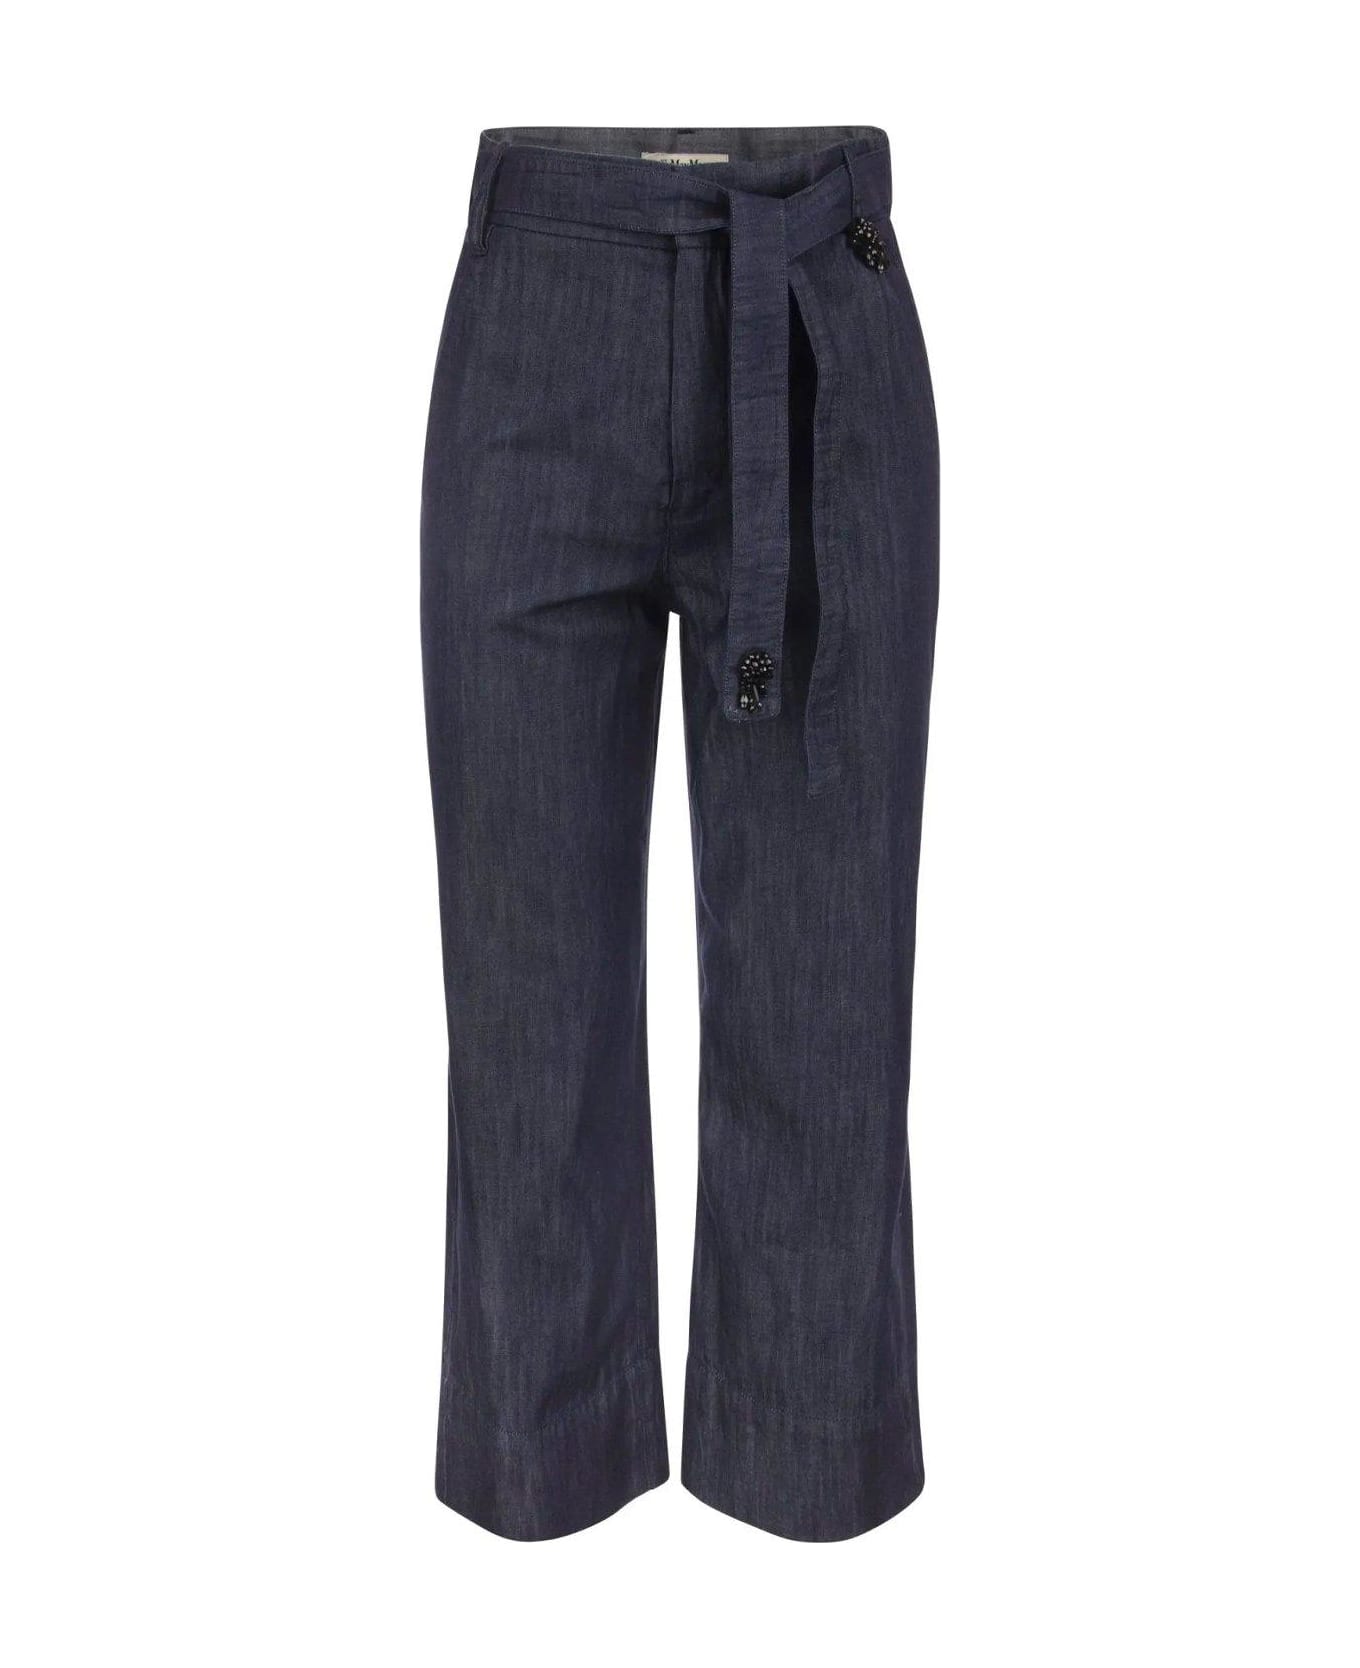 Max Mara Belted Loose-fit Jeans - NAVY